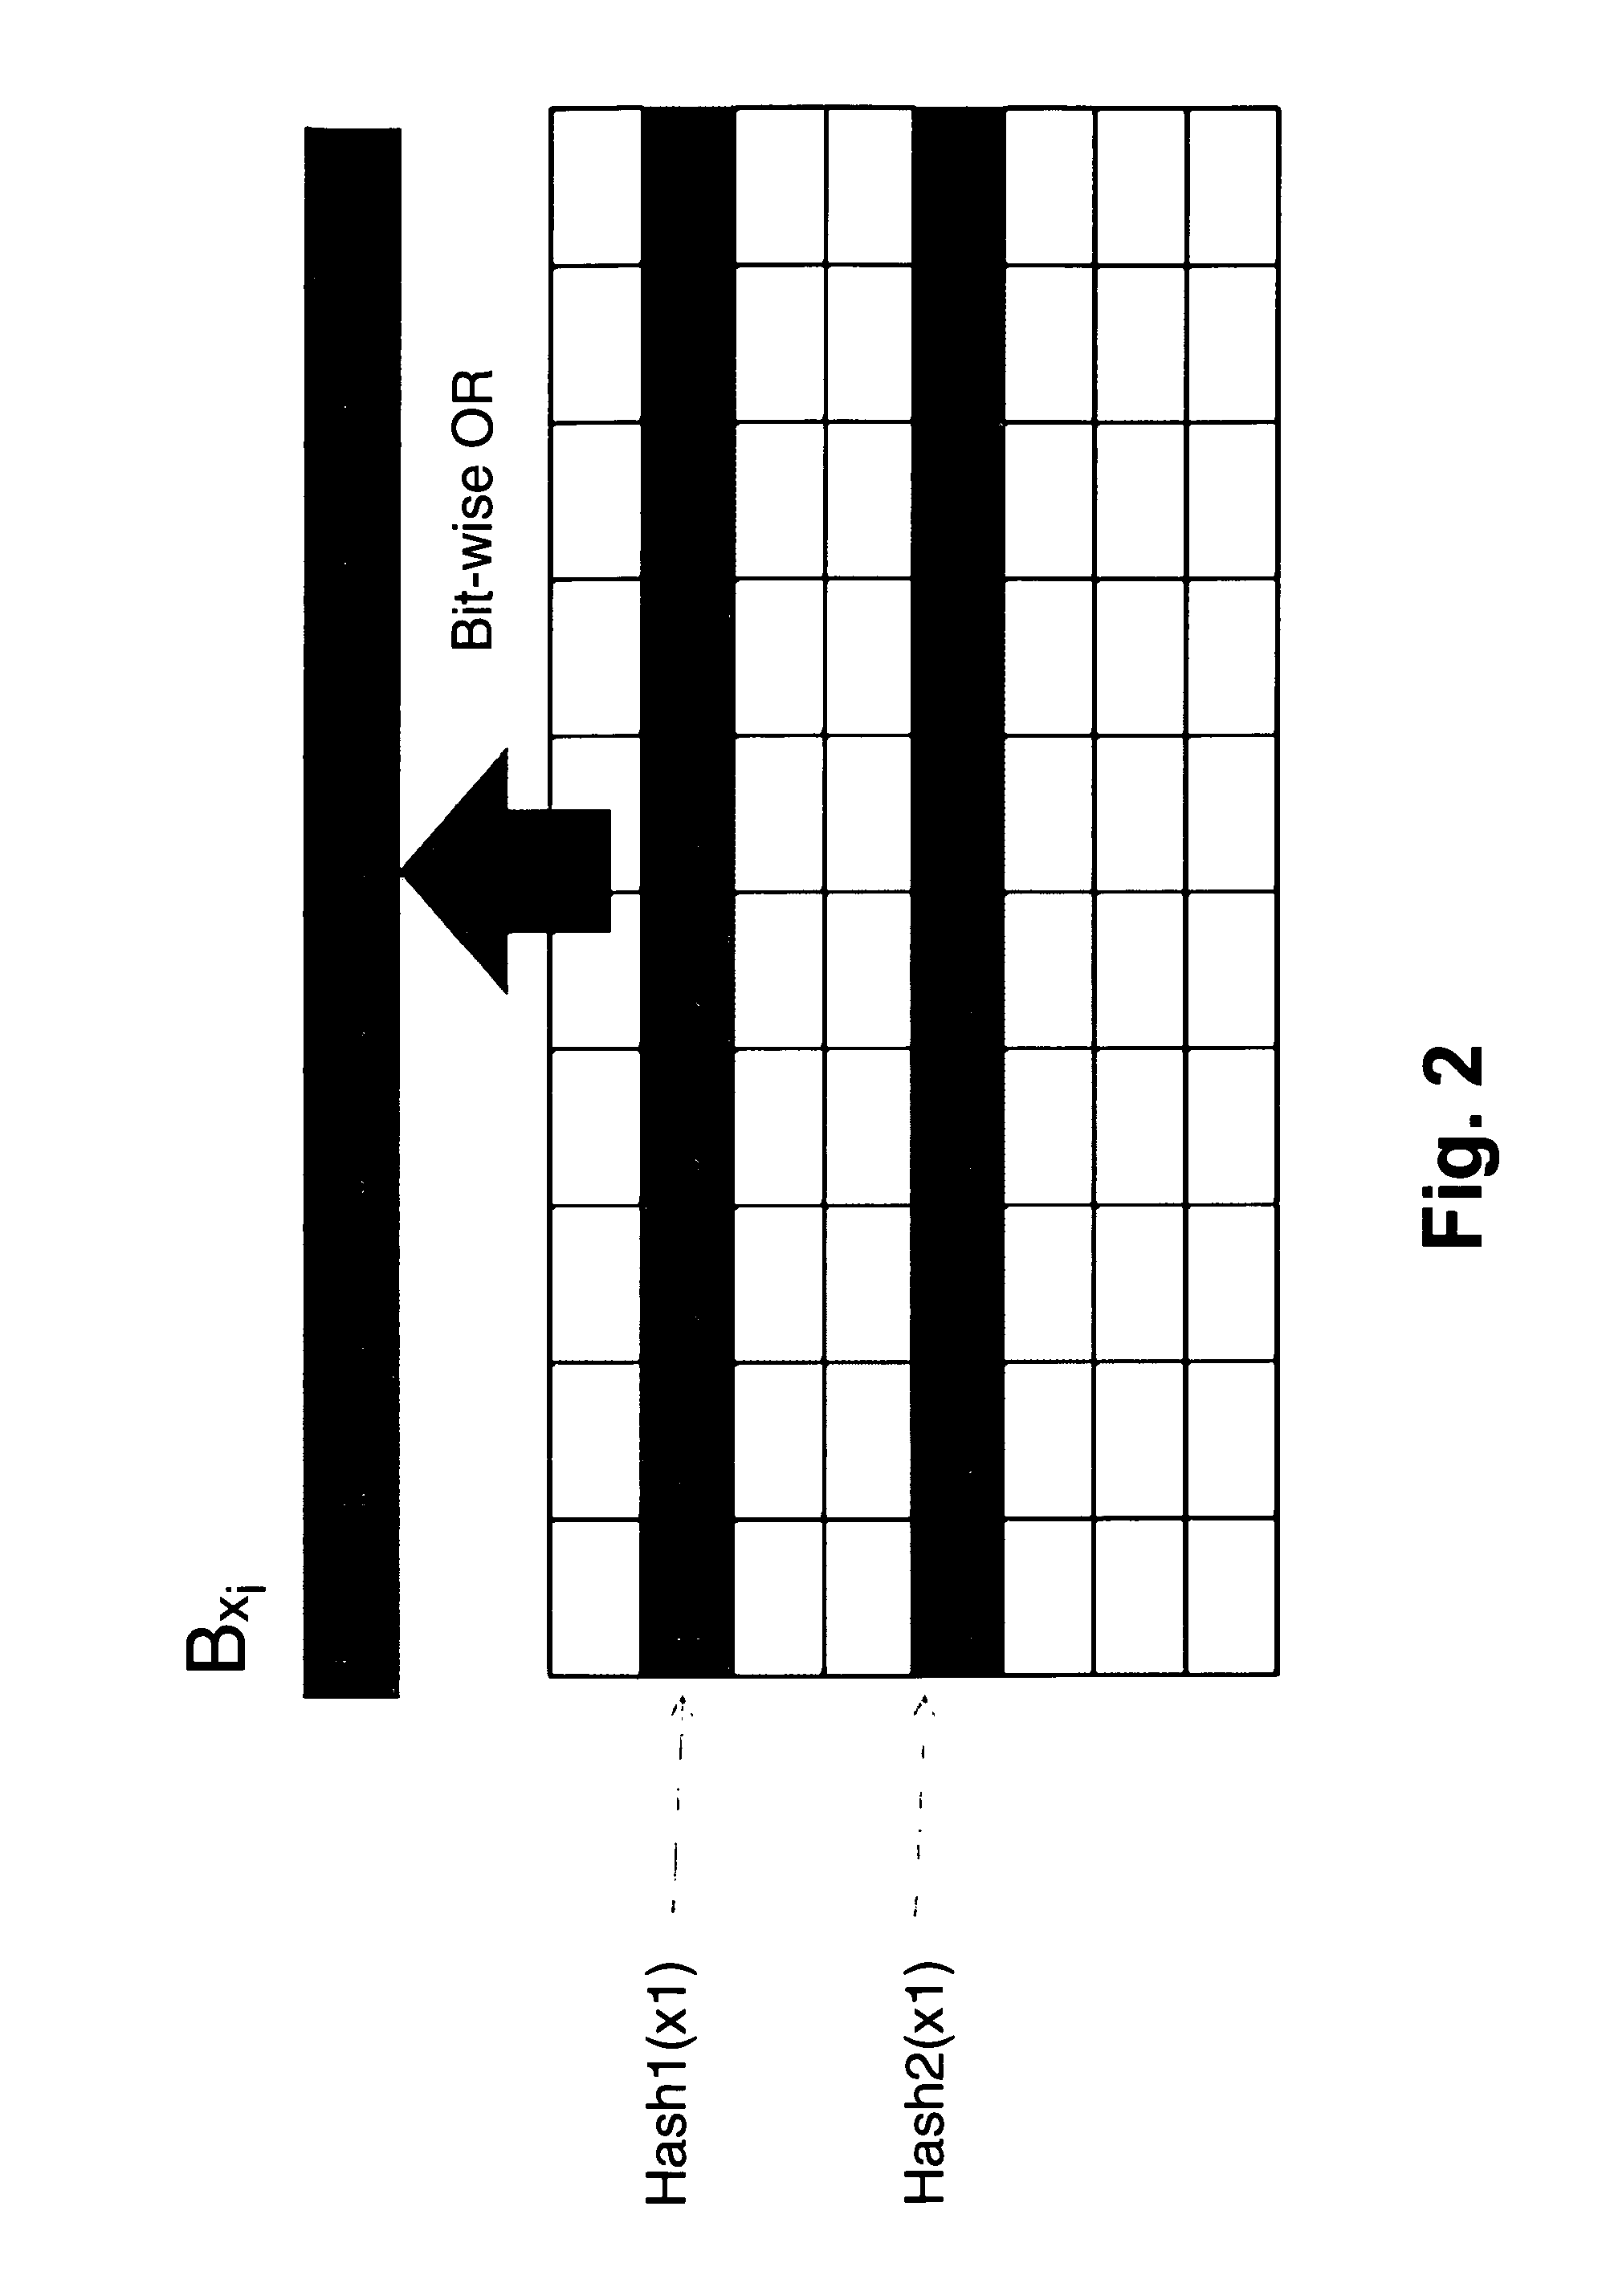 Method and system for probabilistic processing of data using a bit matrix, tuples, and hash values